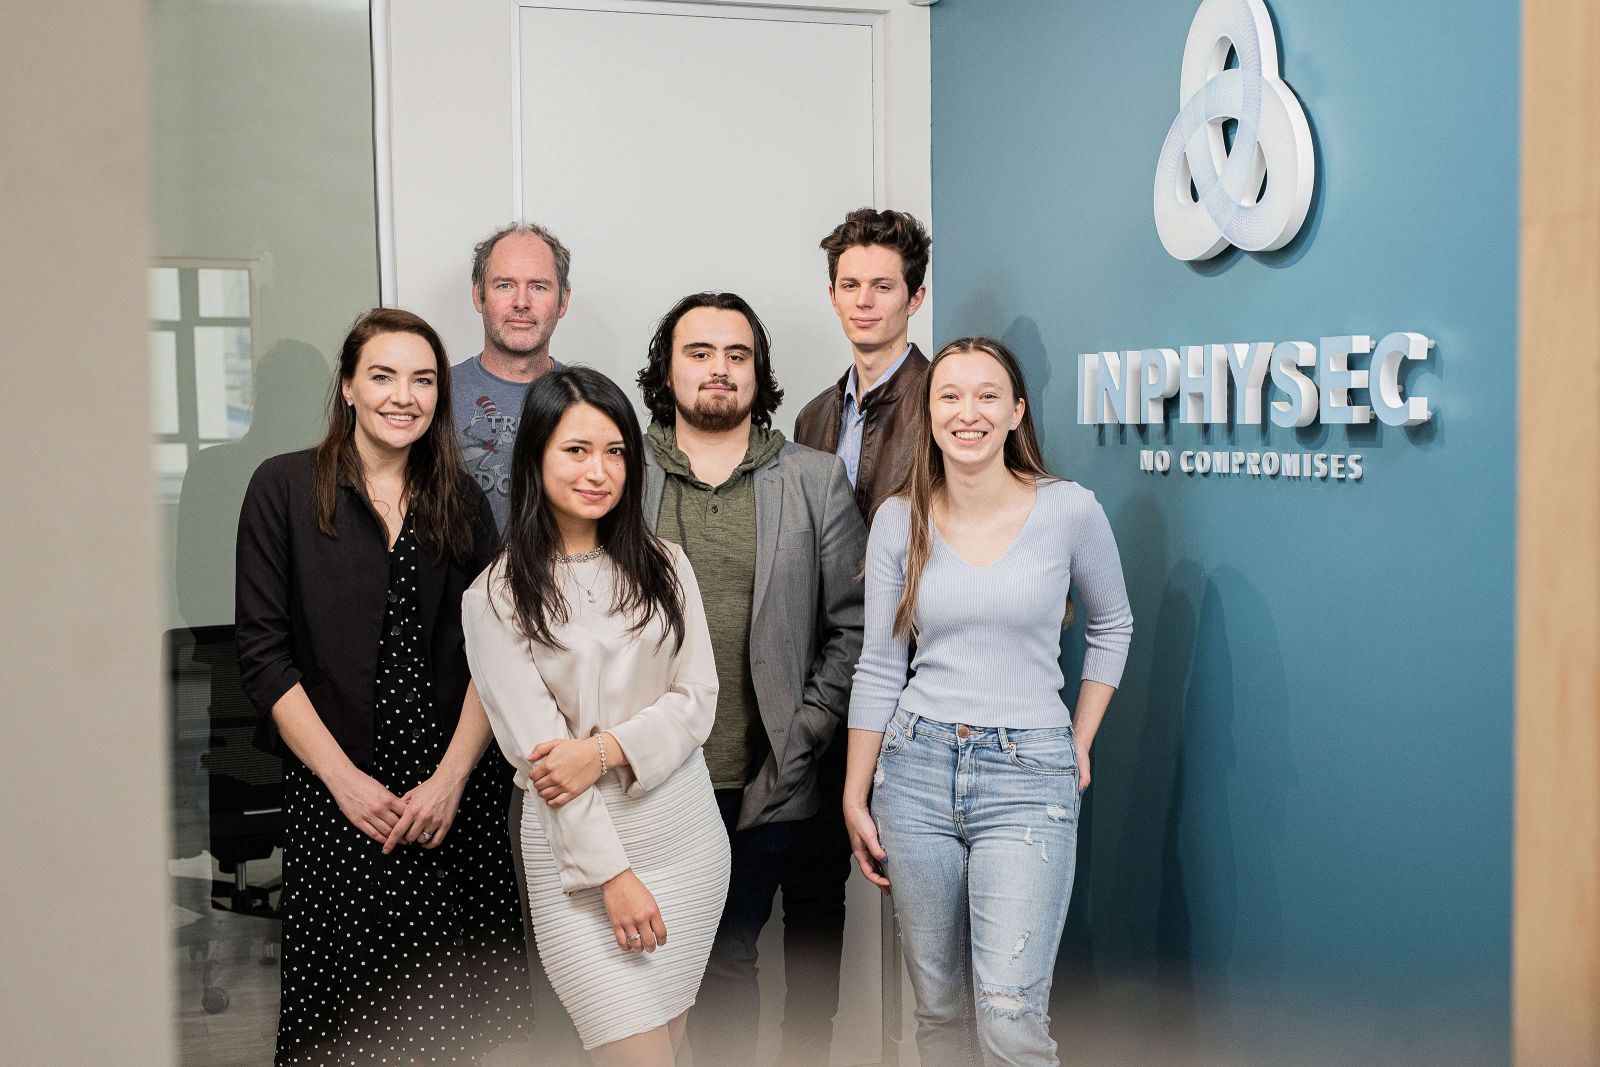 Inphysec staff, from left: Bianca Van der Westhuizen (Director of Client Operations), Marc Barlow (CEO), Camila Lis, Ethan King, Emanuel Evans, and Luisa Kristen.